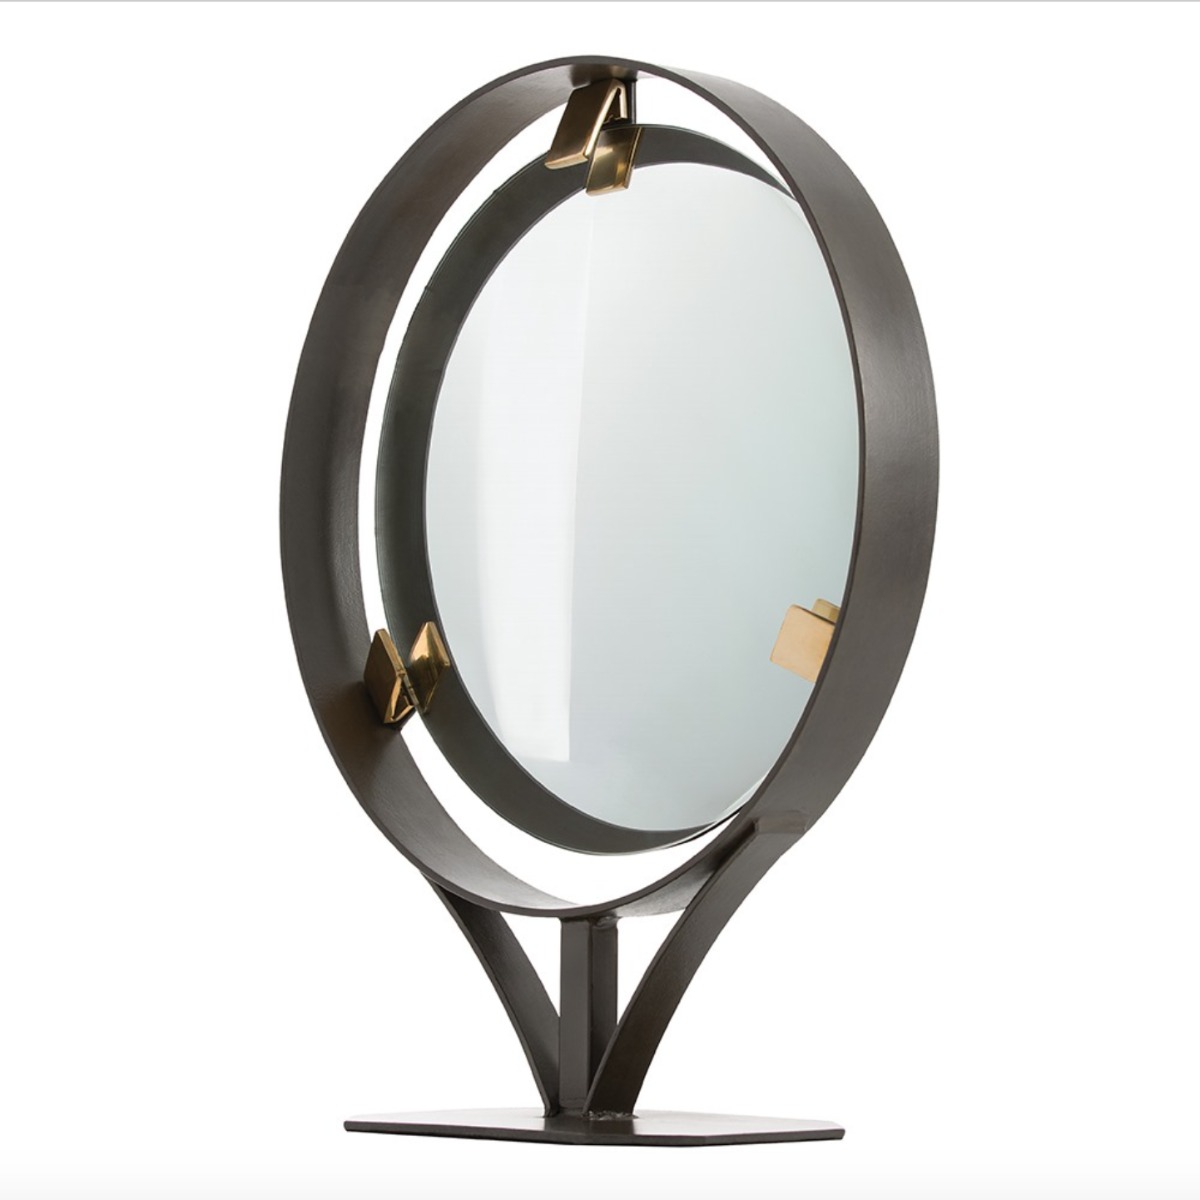 Unique luxury cosmetic mirror industrial style at Luxuria London